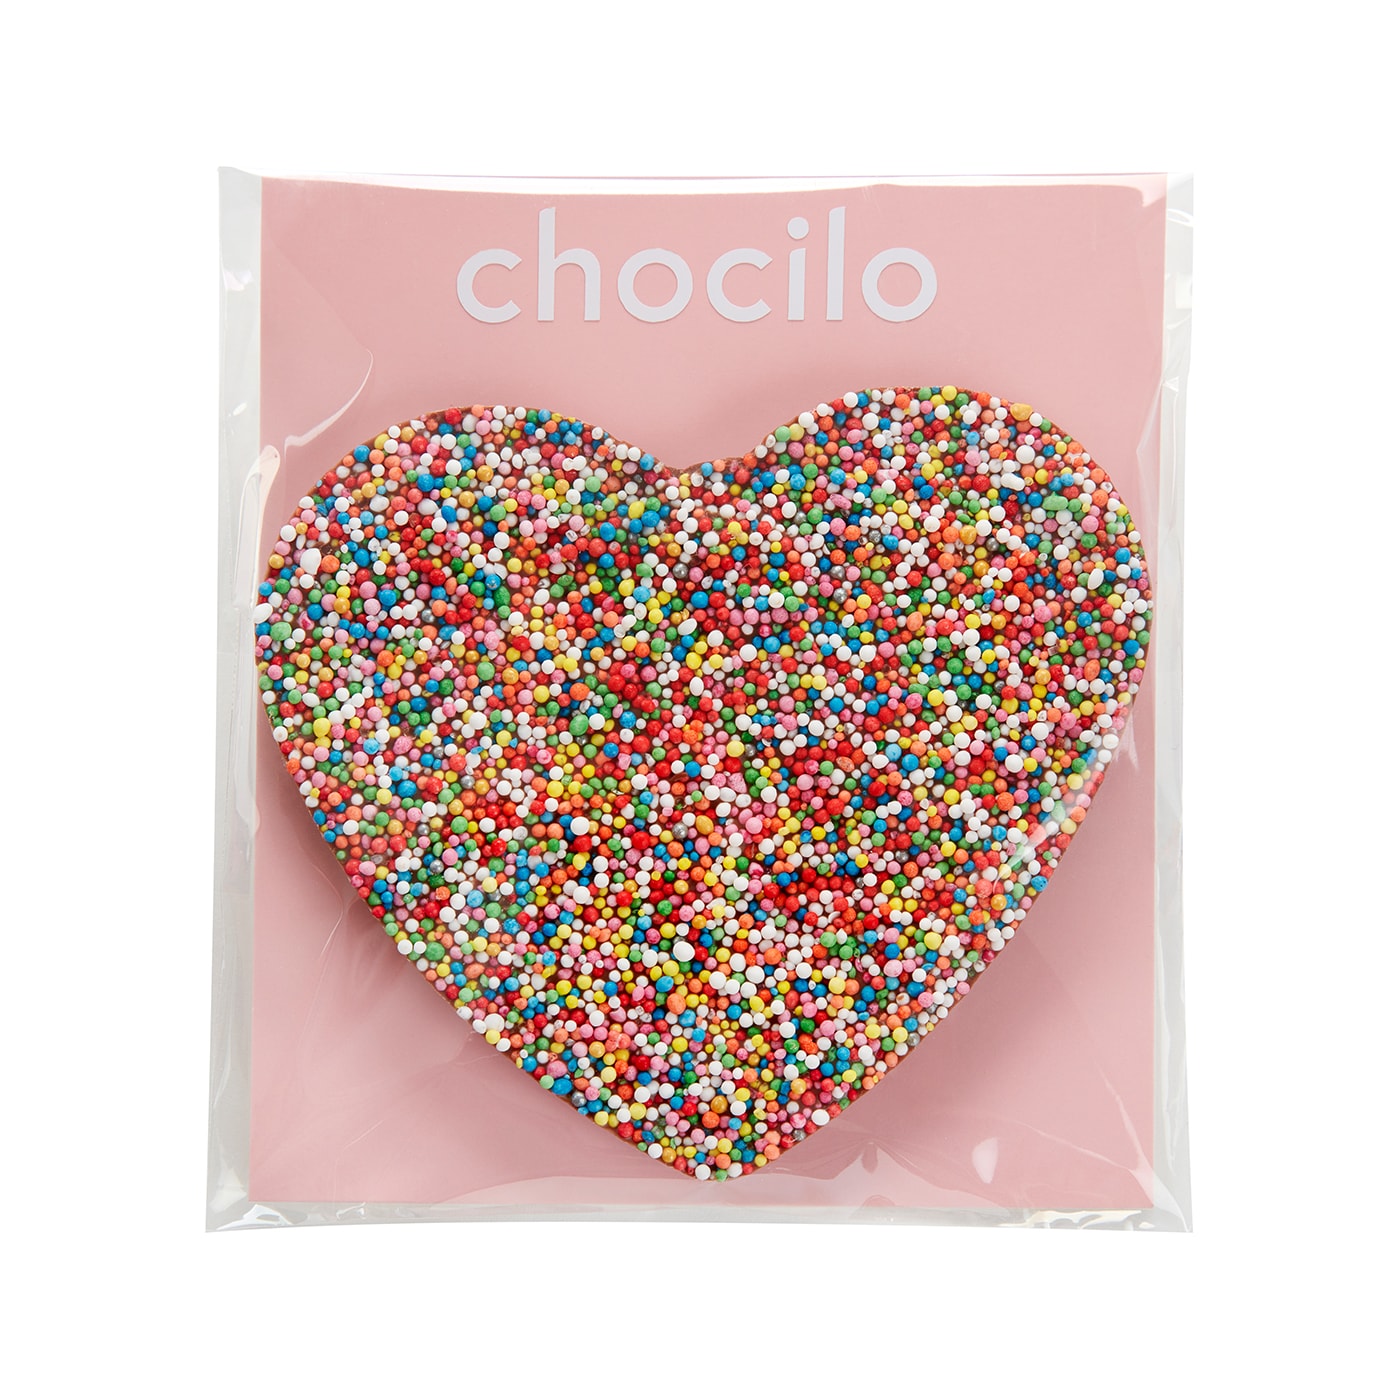 Chocilo Melbourne Milk Chocolate Speckle Heart in Gift Bag